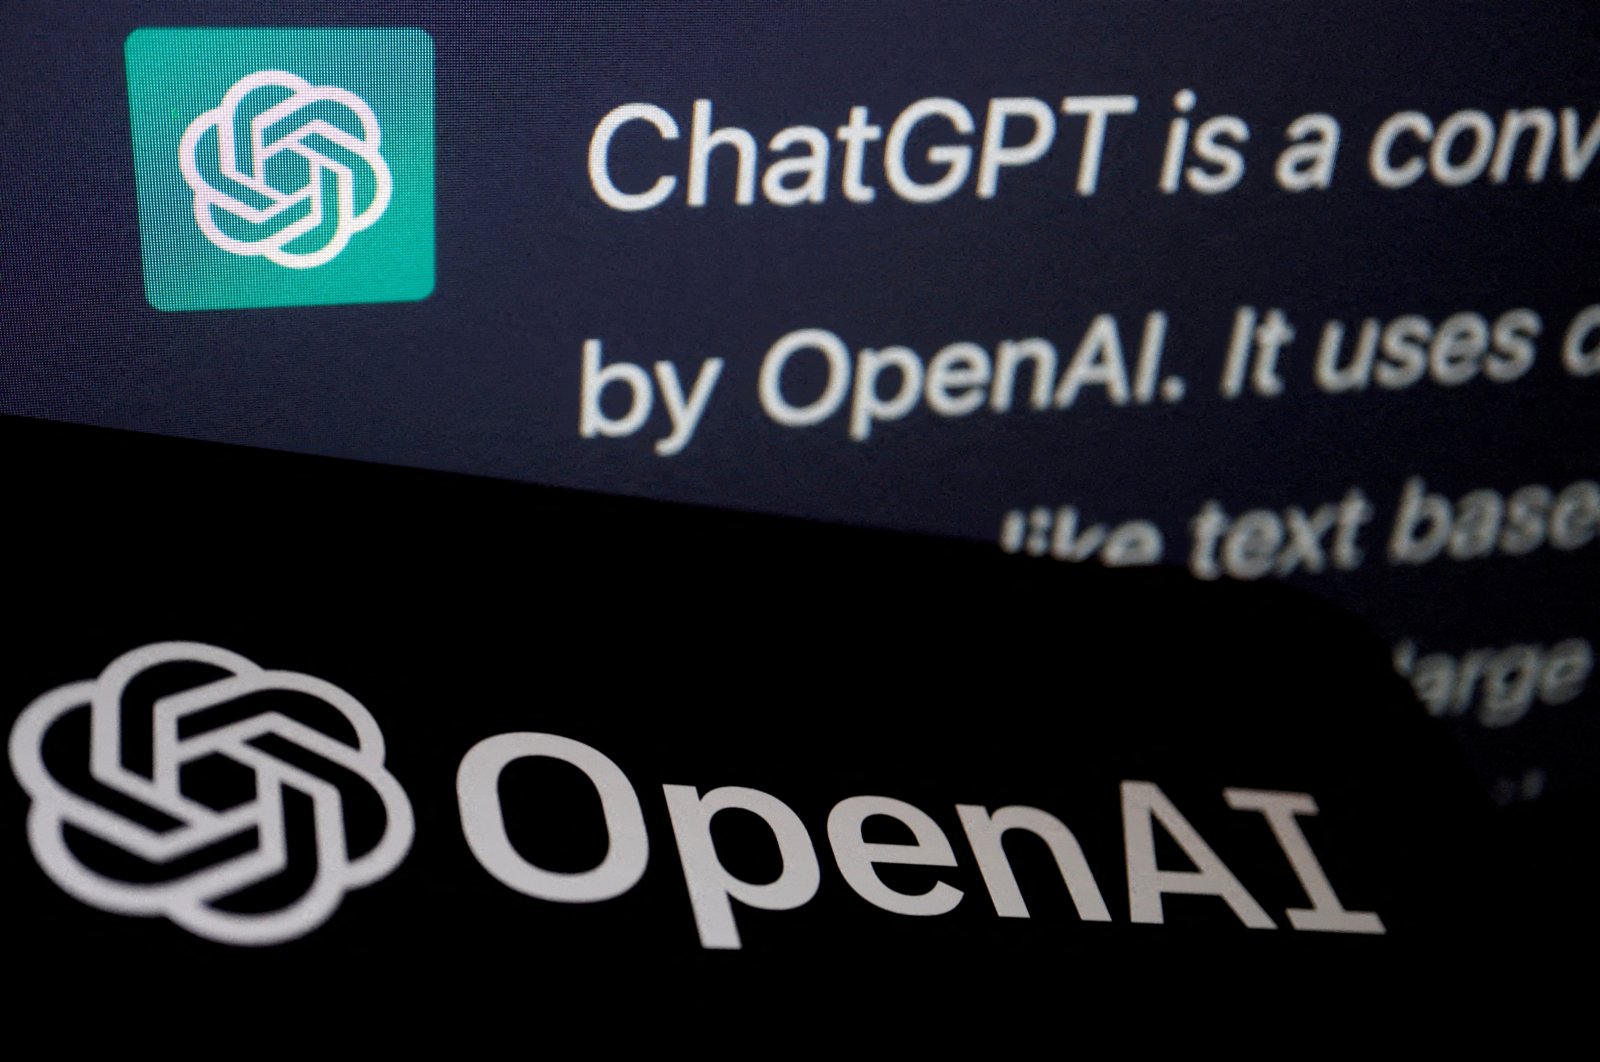 The logo of OpenAI is displayed near a response by its AI chatbot ChatGPT on its website, in this illustration picture, Feb. 9, 2023. (Reuters Photo)